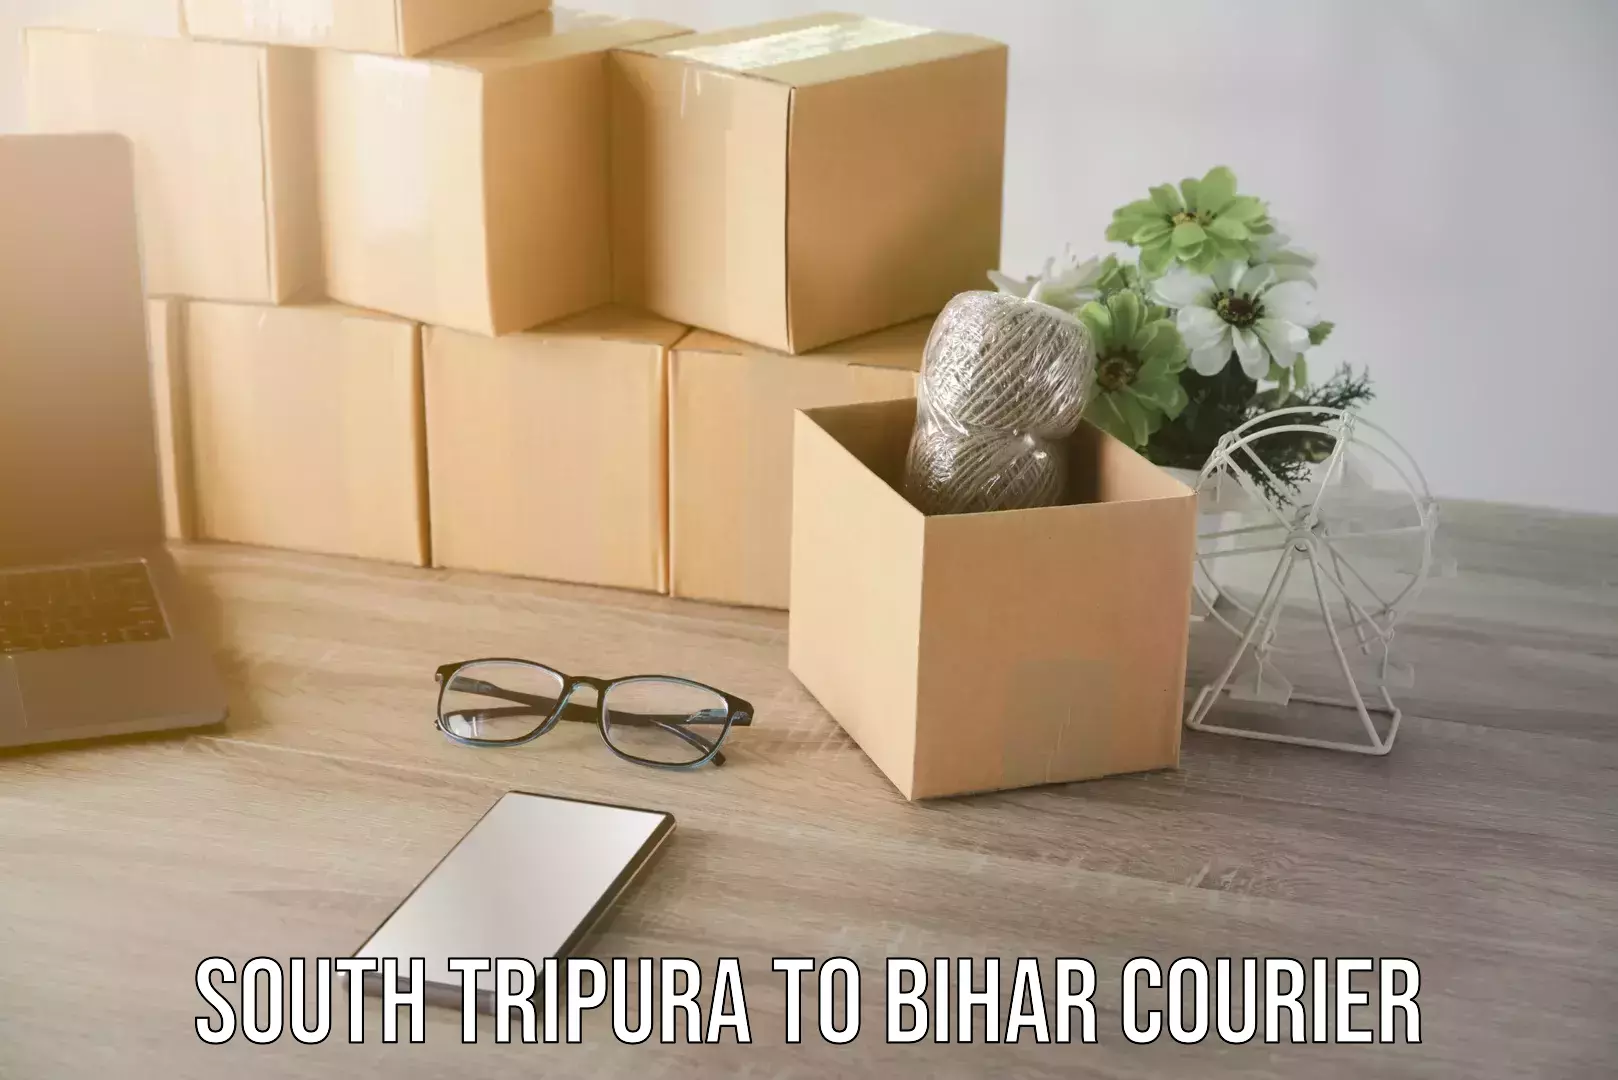 Nationwide parcel services South Tripura to Bihar